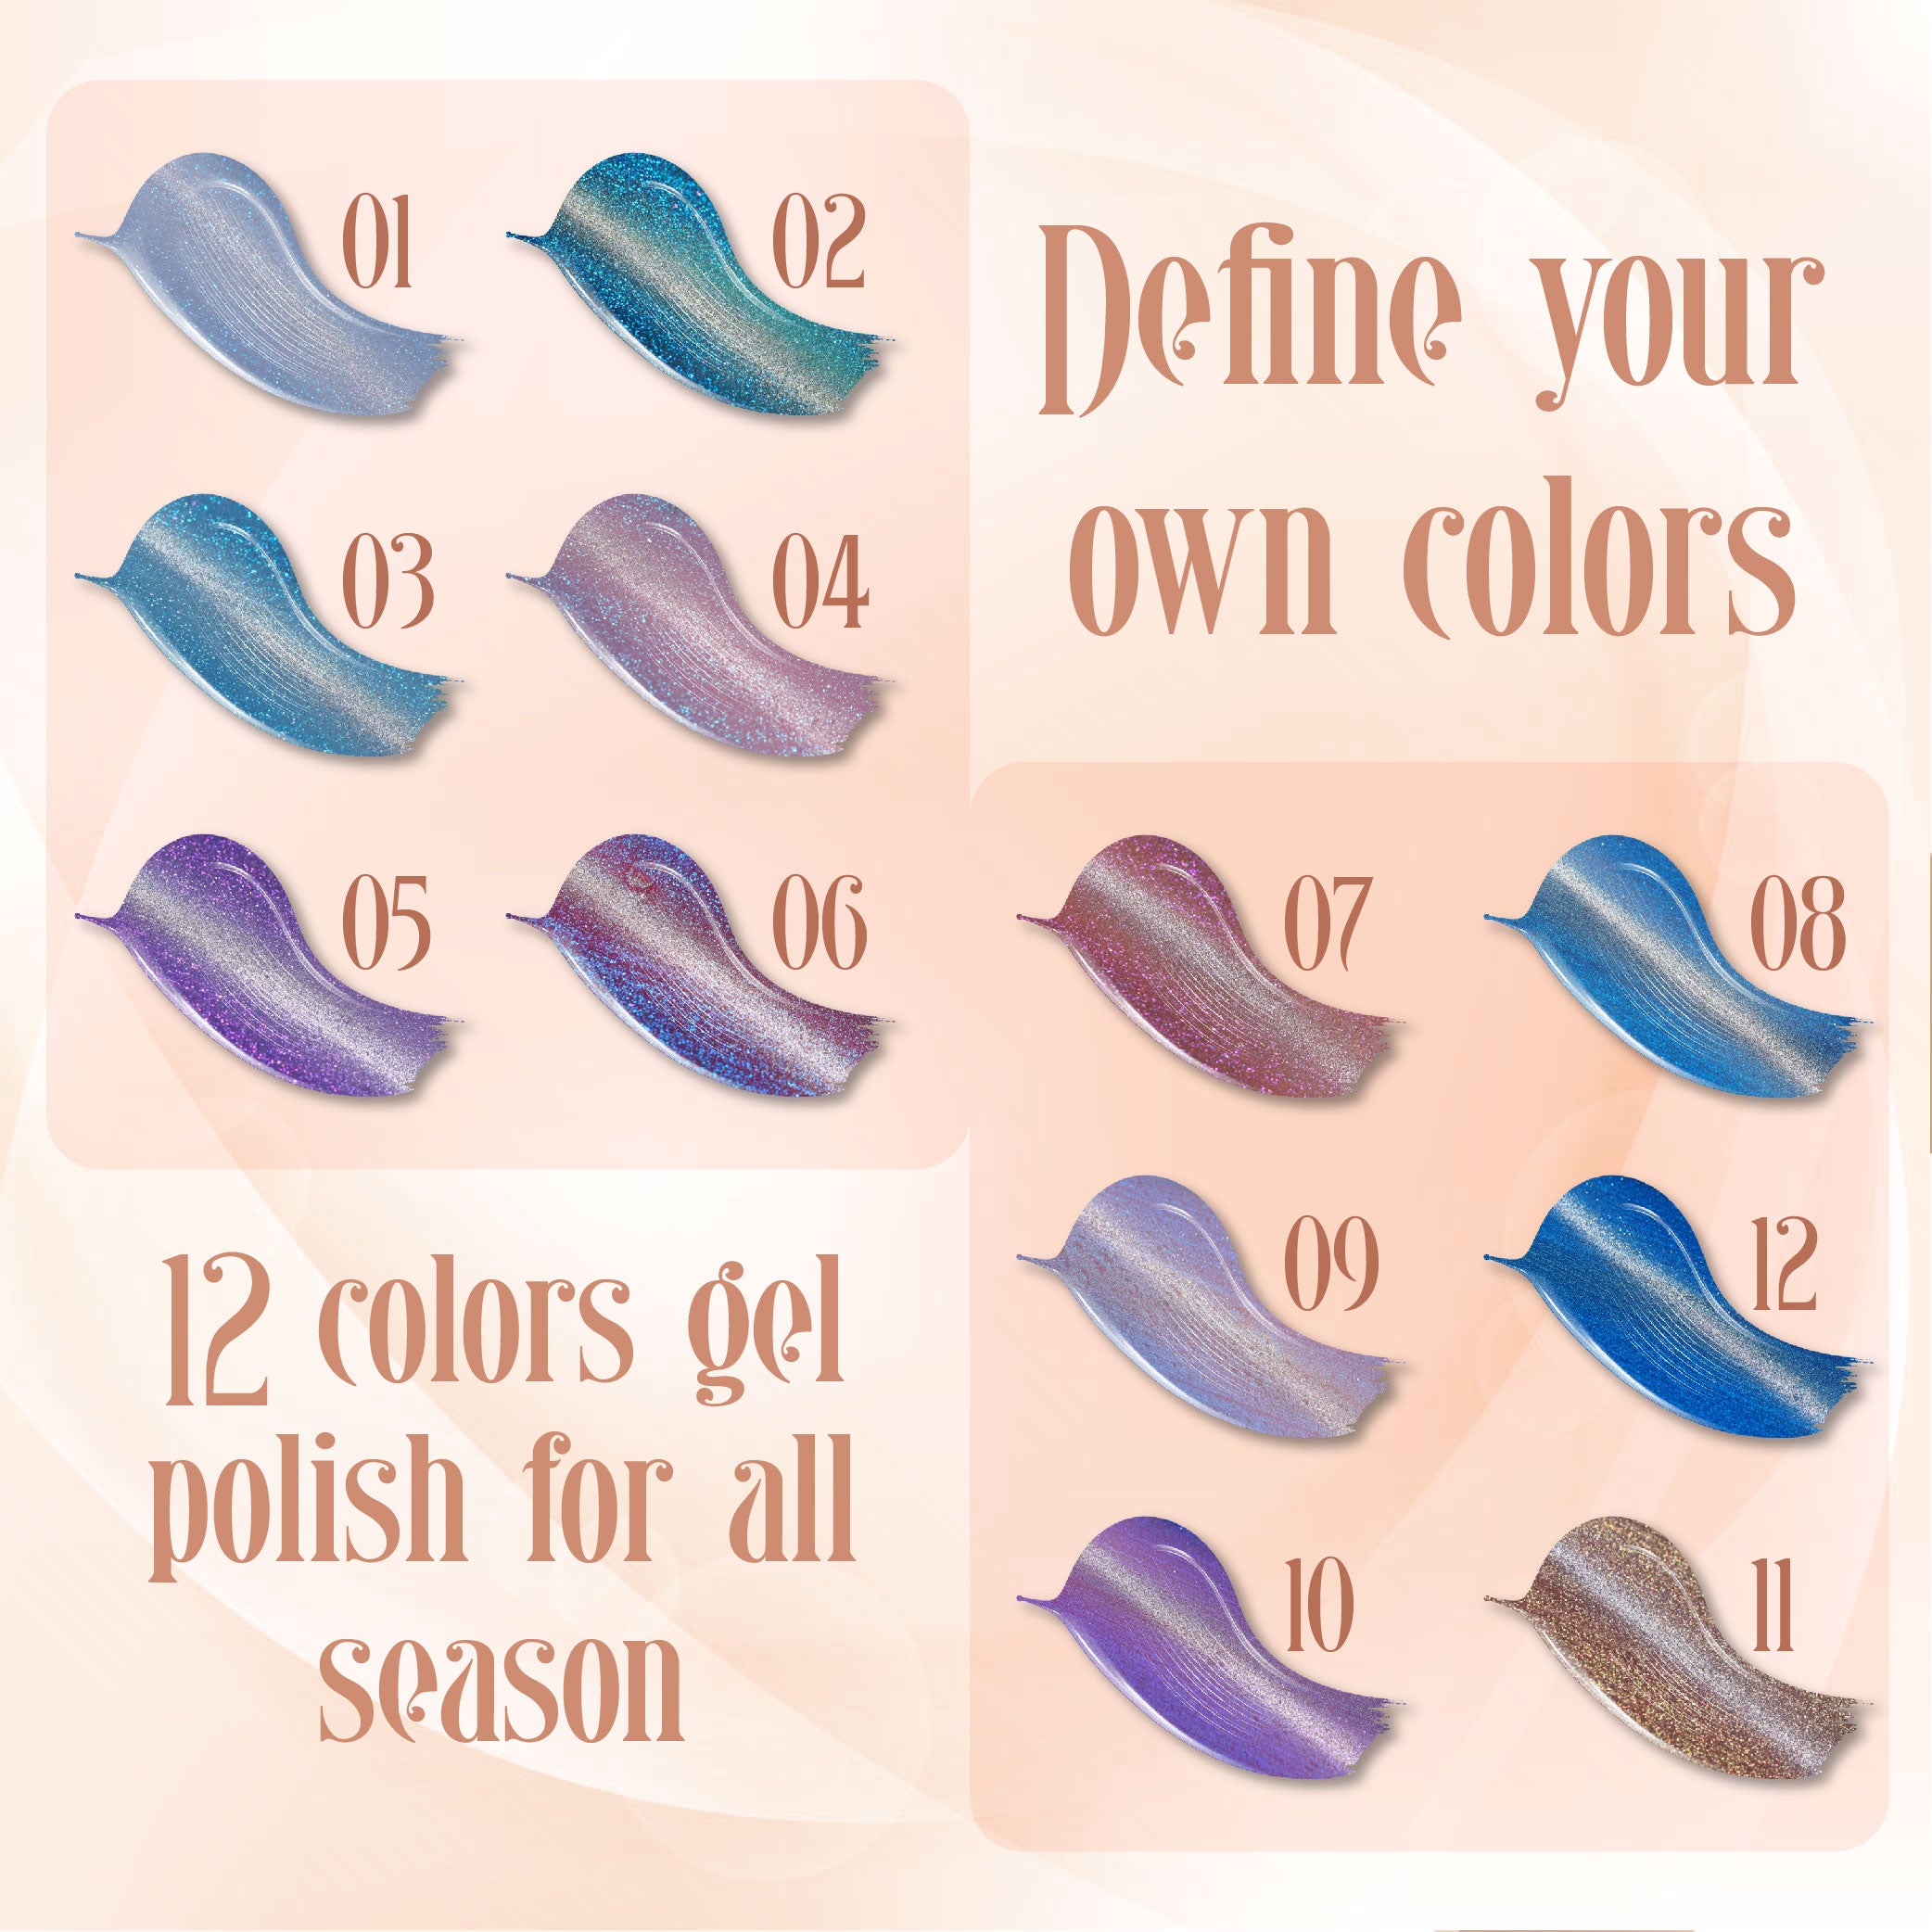 Lavis CE11 - Set 12 Colors - Enchanted Spell Collection